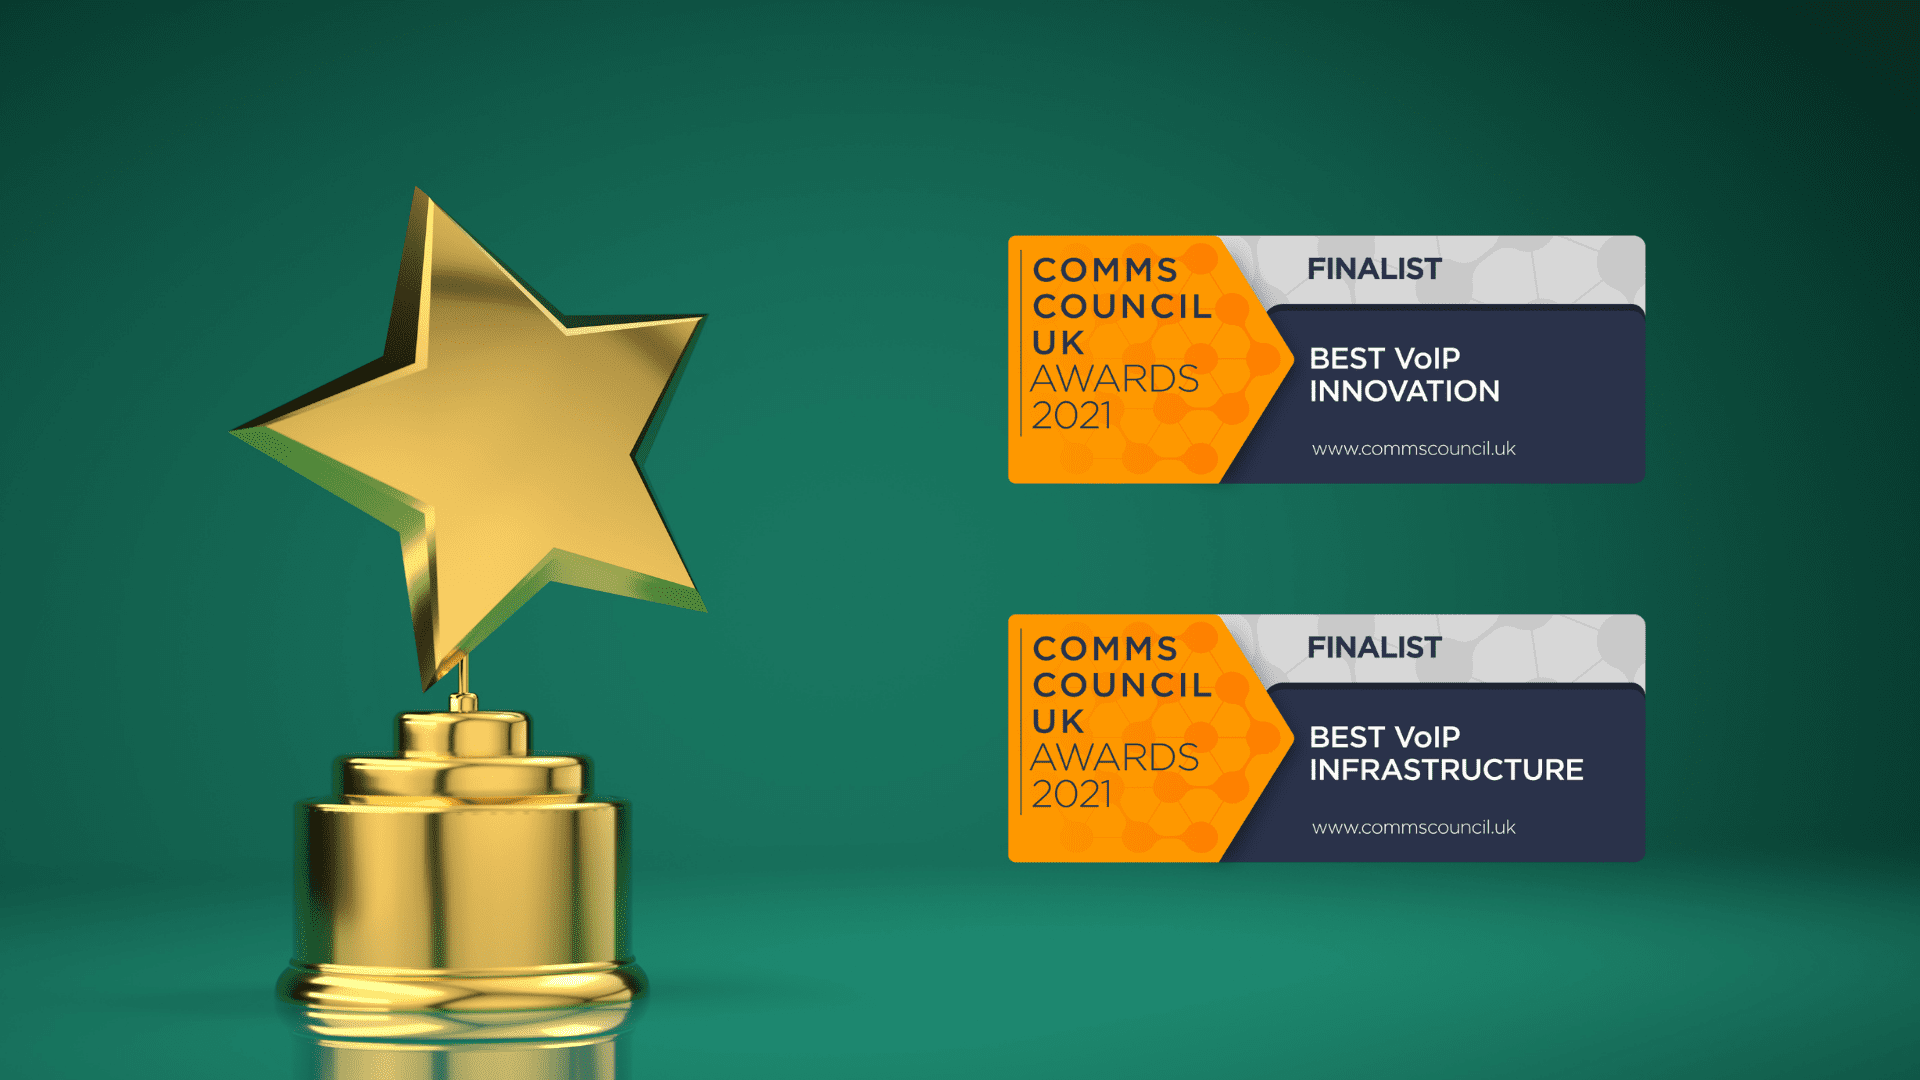 Finalist Best VoIP Innovation and Infrastructure - Comms Council UK Awards 2021